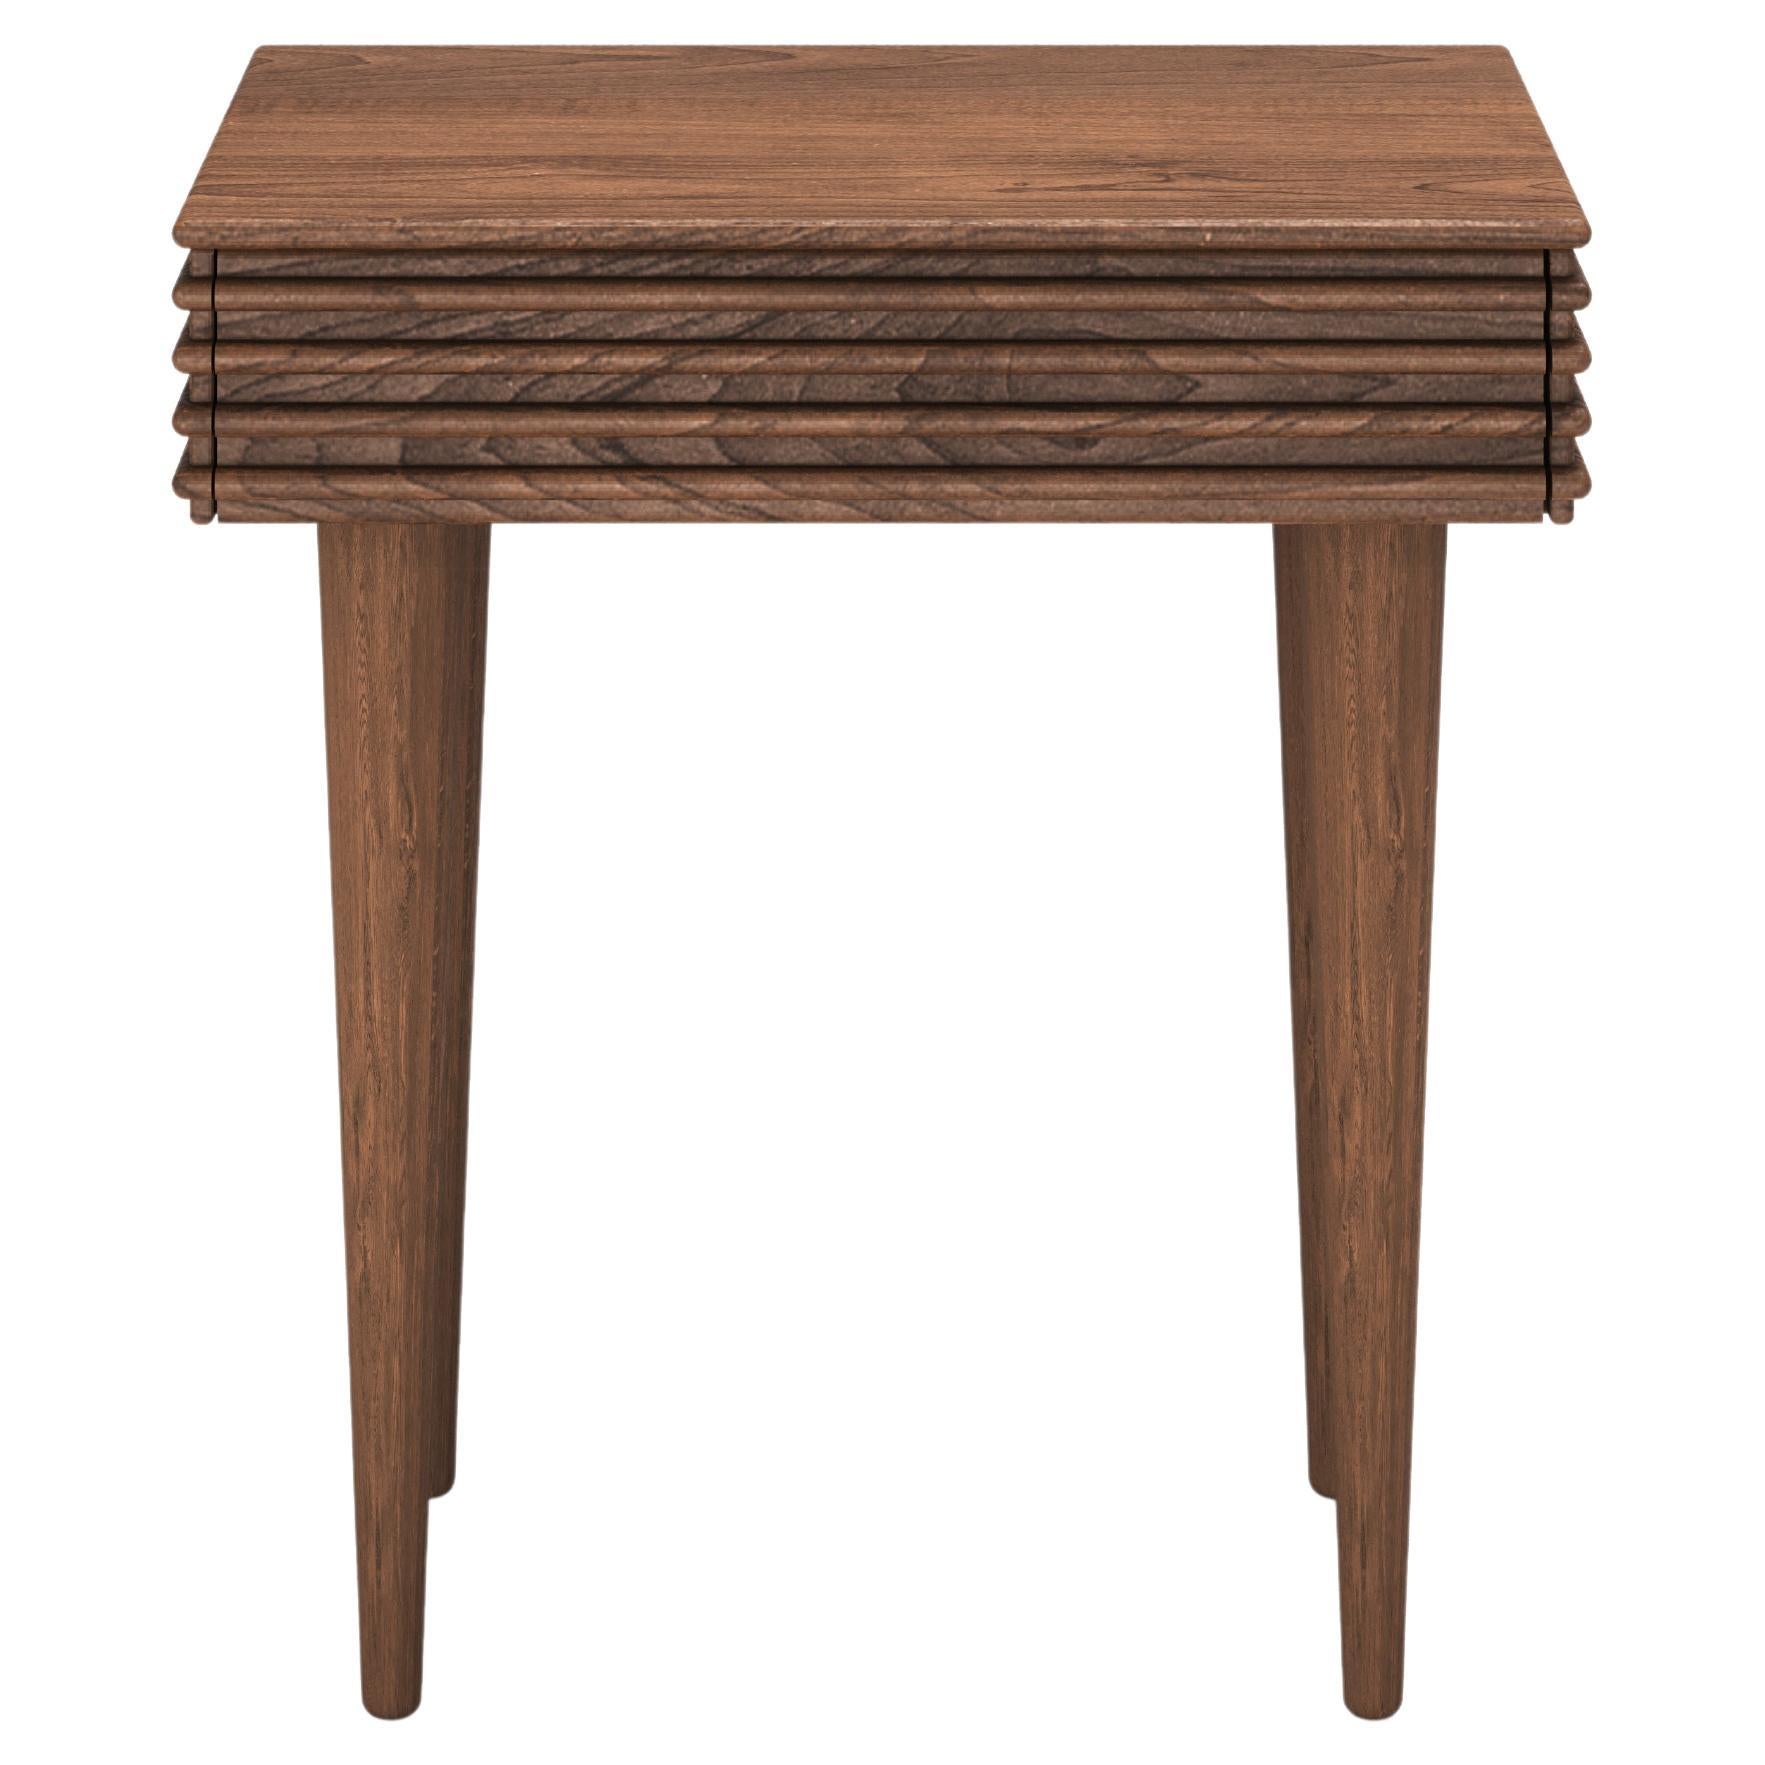 Contemporary Night Table 'Groove' by DK3, Walnut, M 42.5 cm, More Wood Finishes